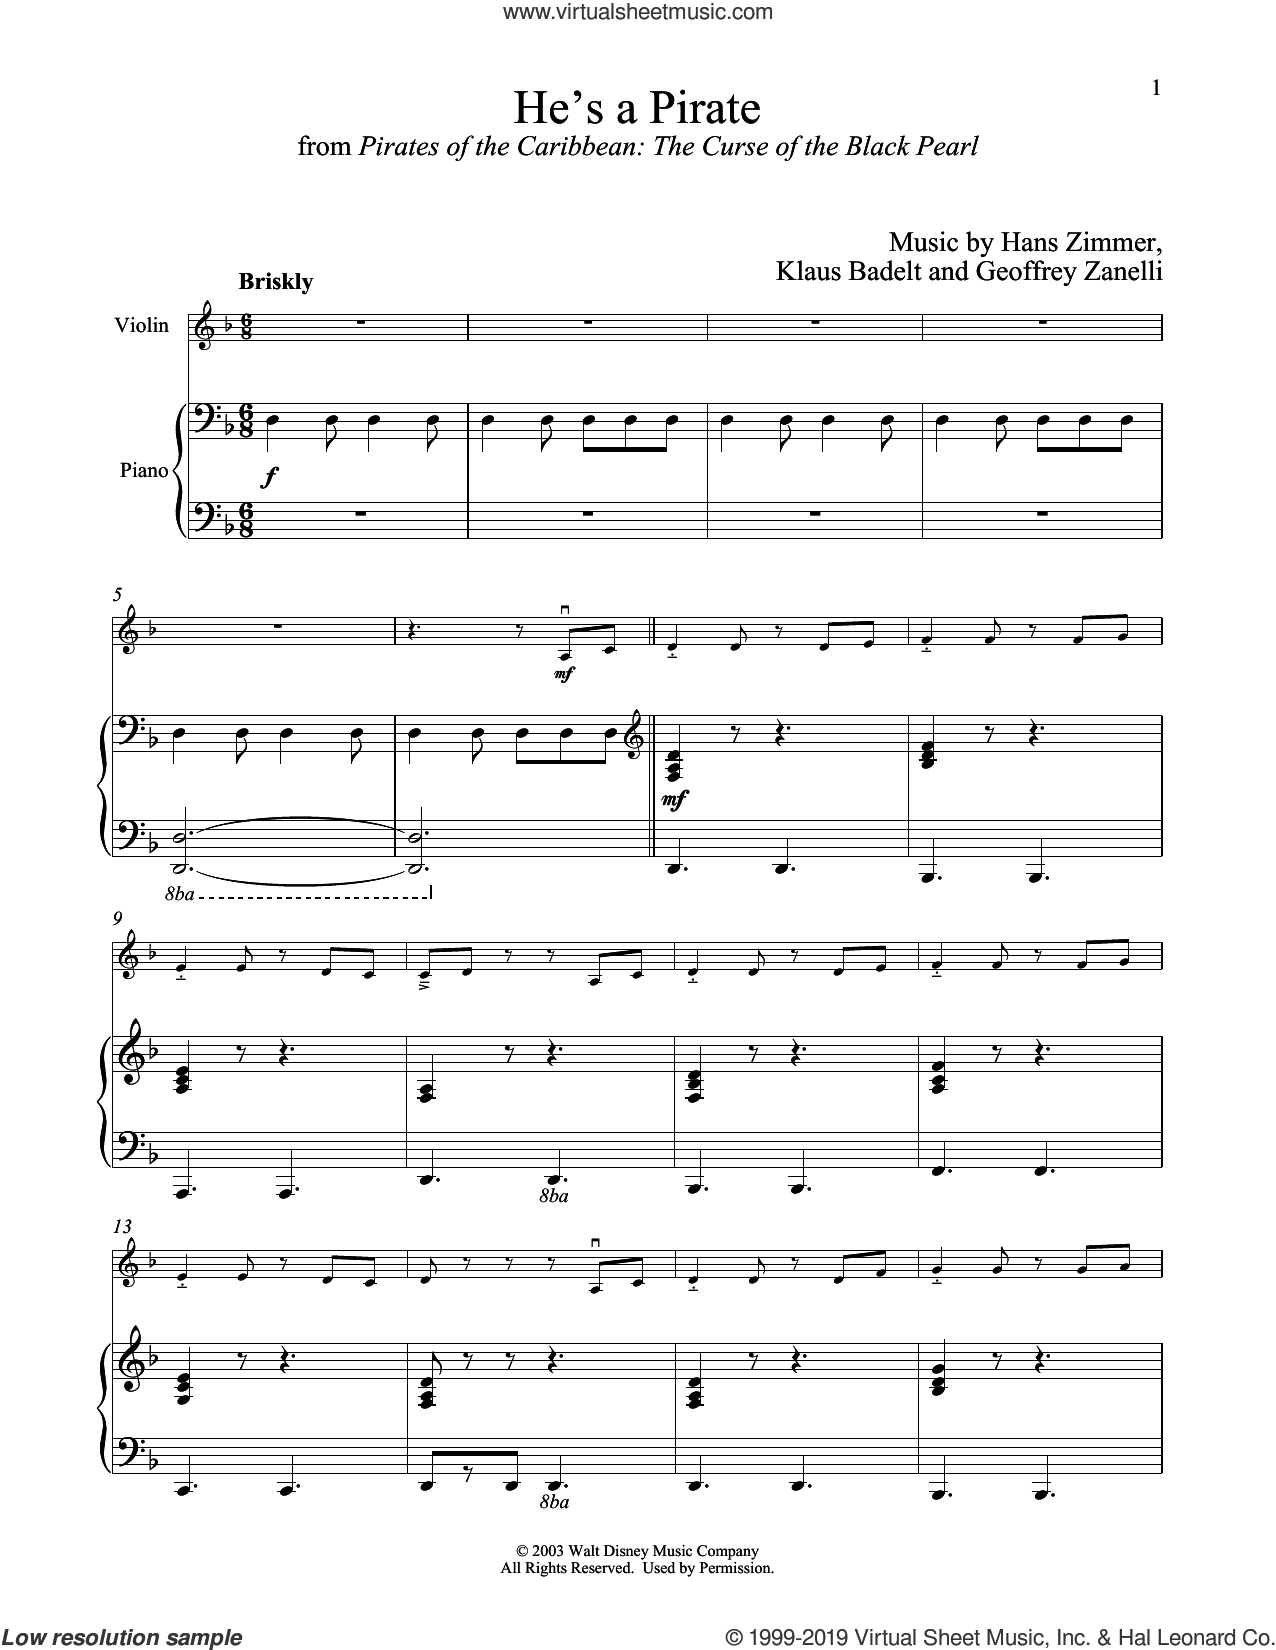 He's A Pirate Pirates Of Caribbean: The Curse of the Black Pearl) sheet music for violin and piano